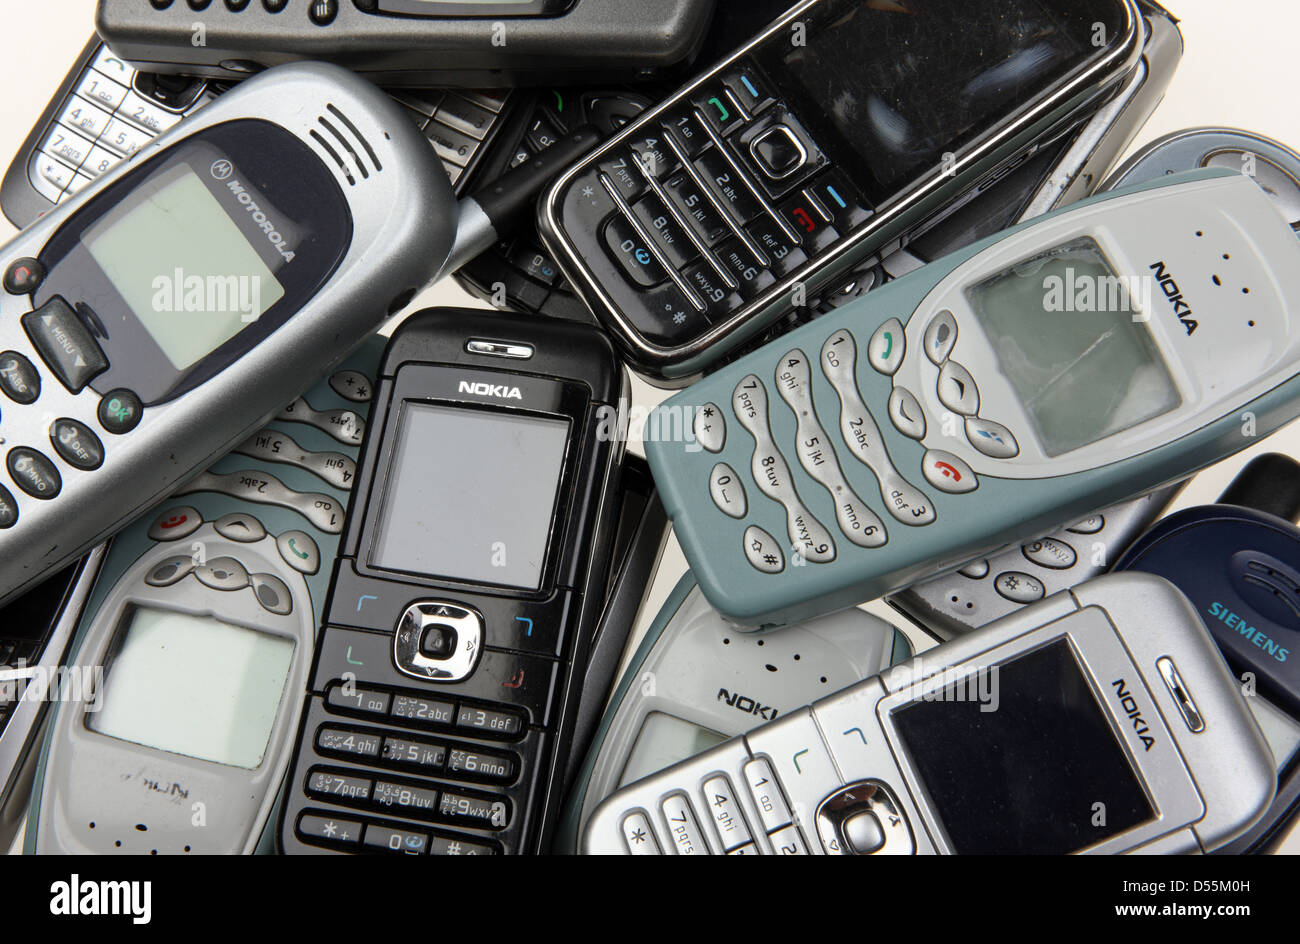 Berlin, Germany, on a pile of old cell phones Stock Photo